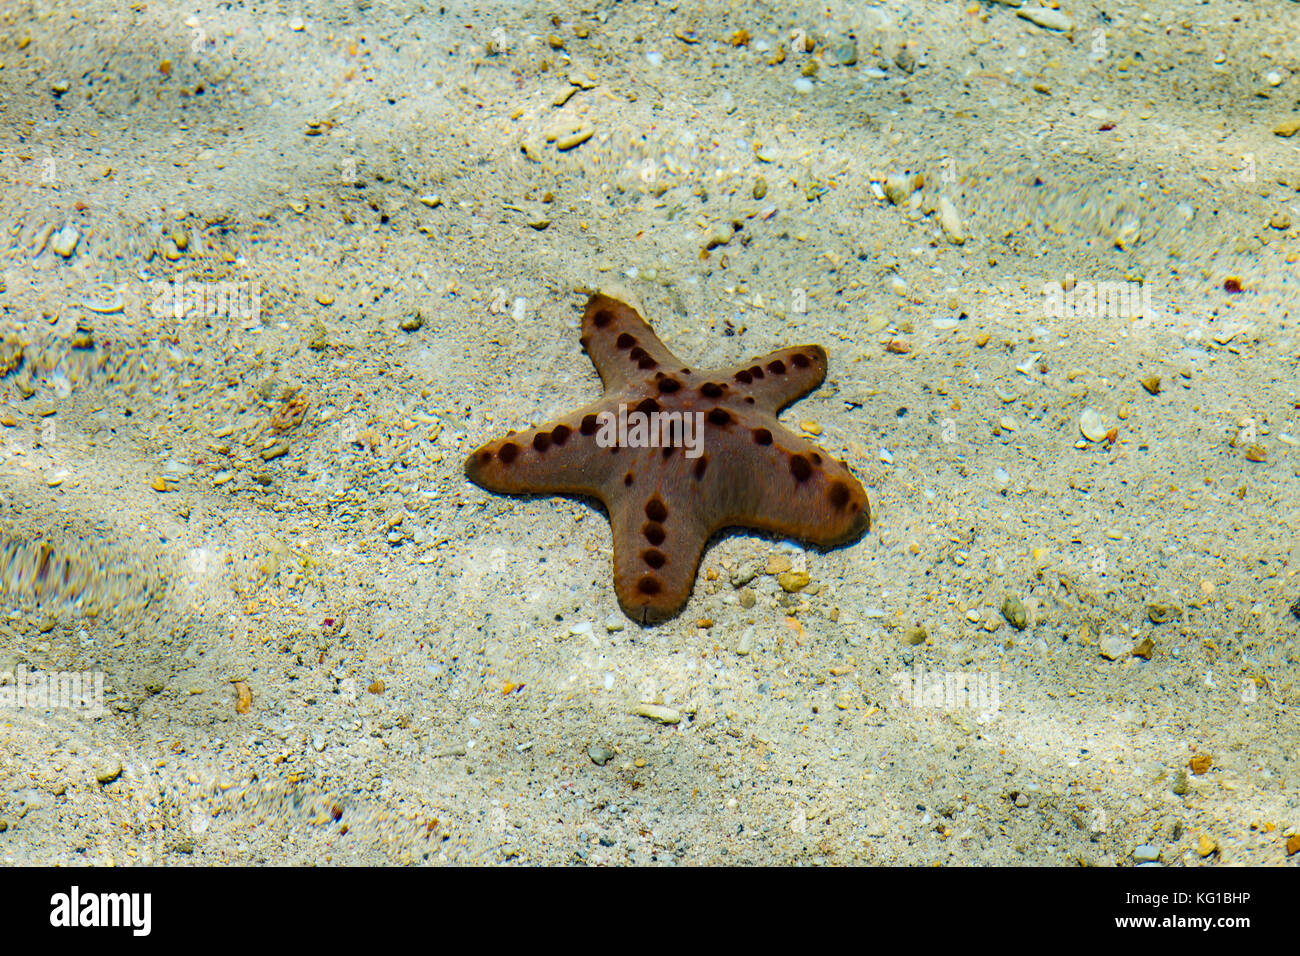 Asia Philippines Palawan El Nido  Horned Sea Star Starfish (Protoreaster nodosus) at Snake Island, one of the highlights of tour B Stock Photo